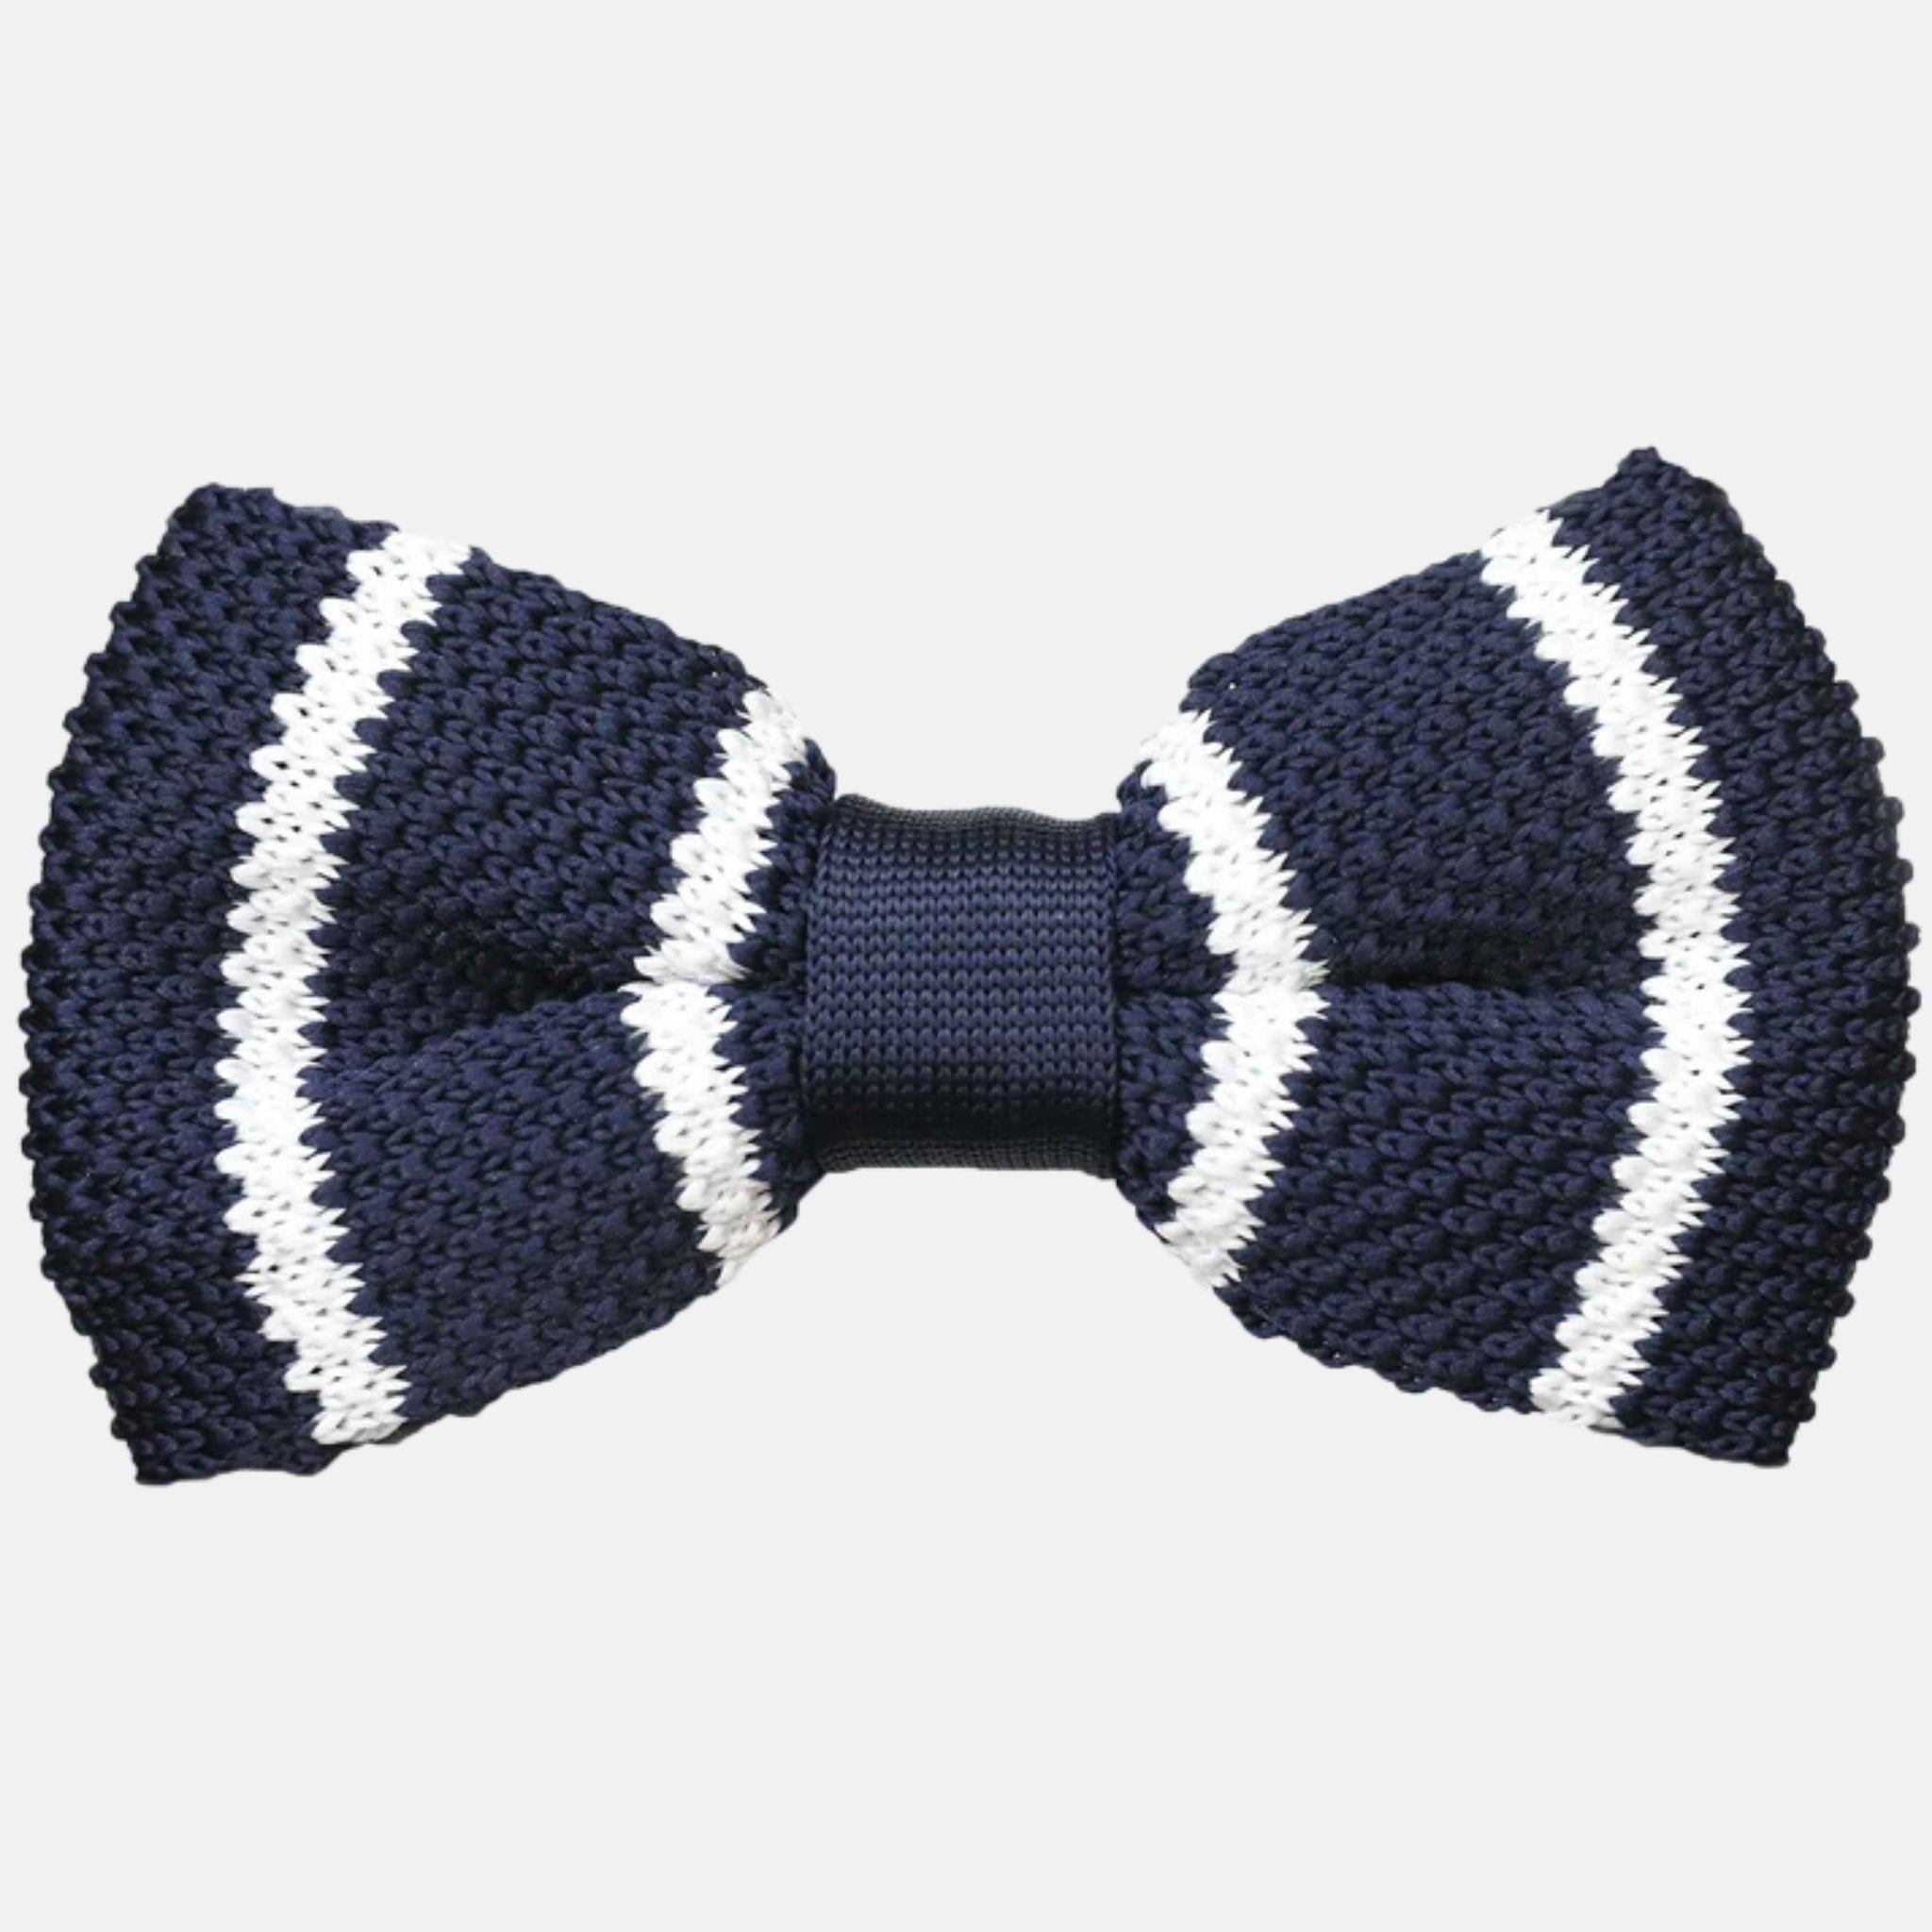 Blue tricot bow tie with white stripes